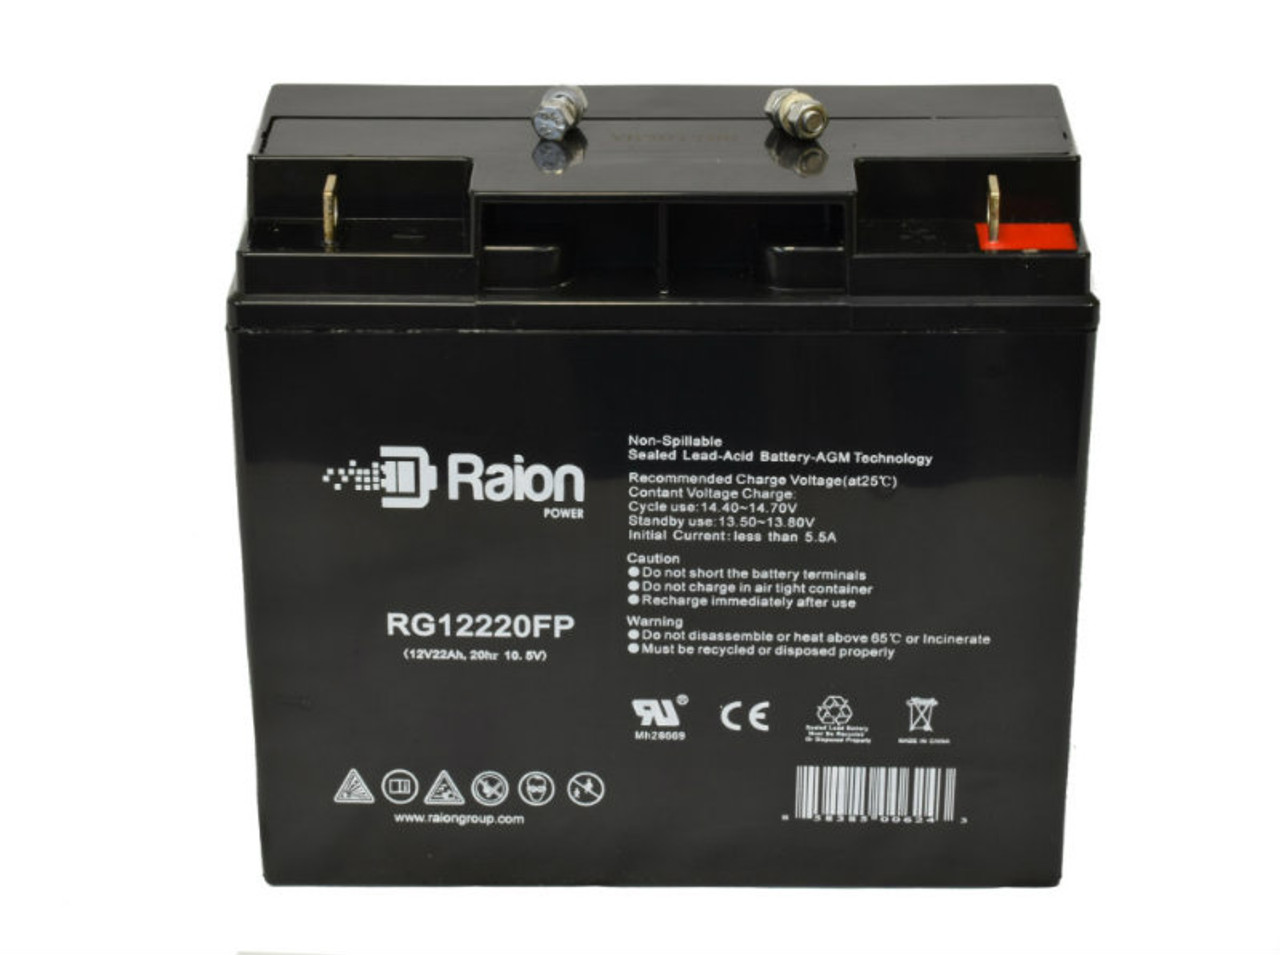 Raion Power 12V 22Ah Rechargeable Non-Spillable Replacement Battery for KAGE MF12V21Ah